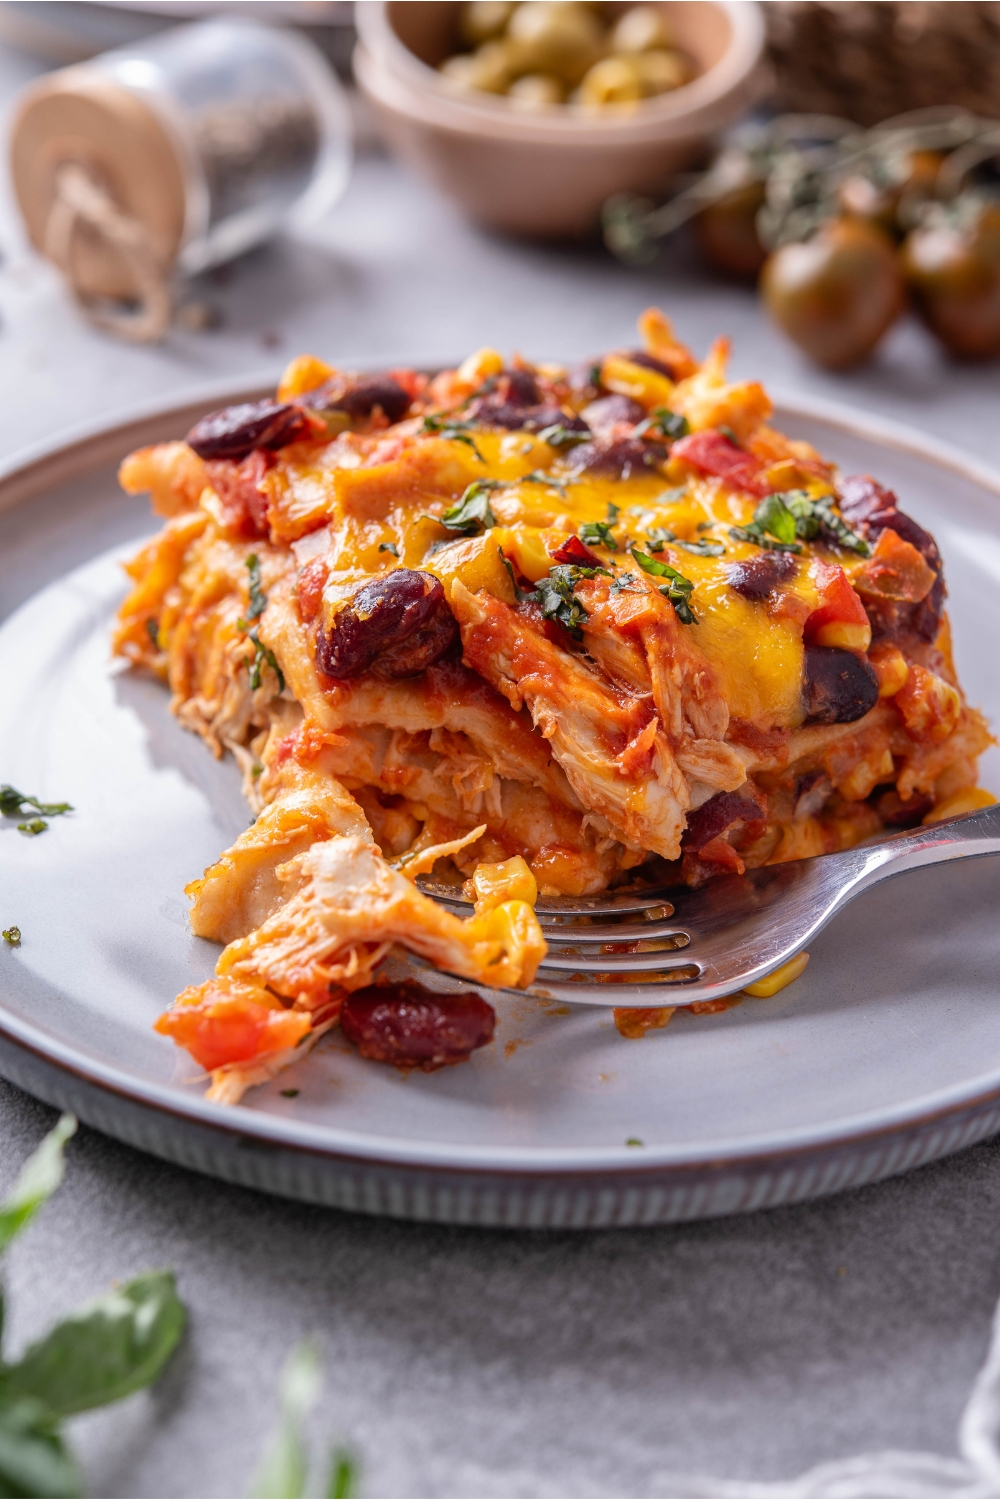 A serving of chicken tortilla casserole layered with shredded chicken, black beans, tomato sauce, melted cheese, and a bite has been taken out with a fork.